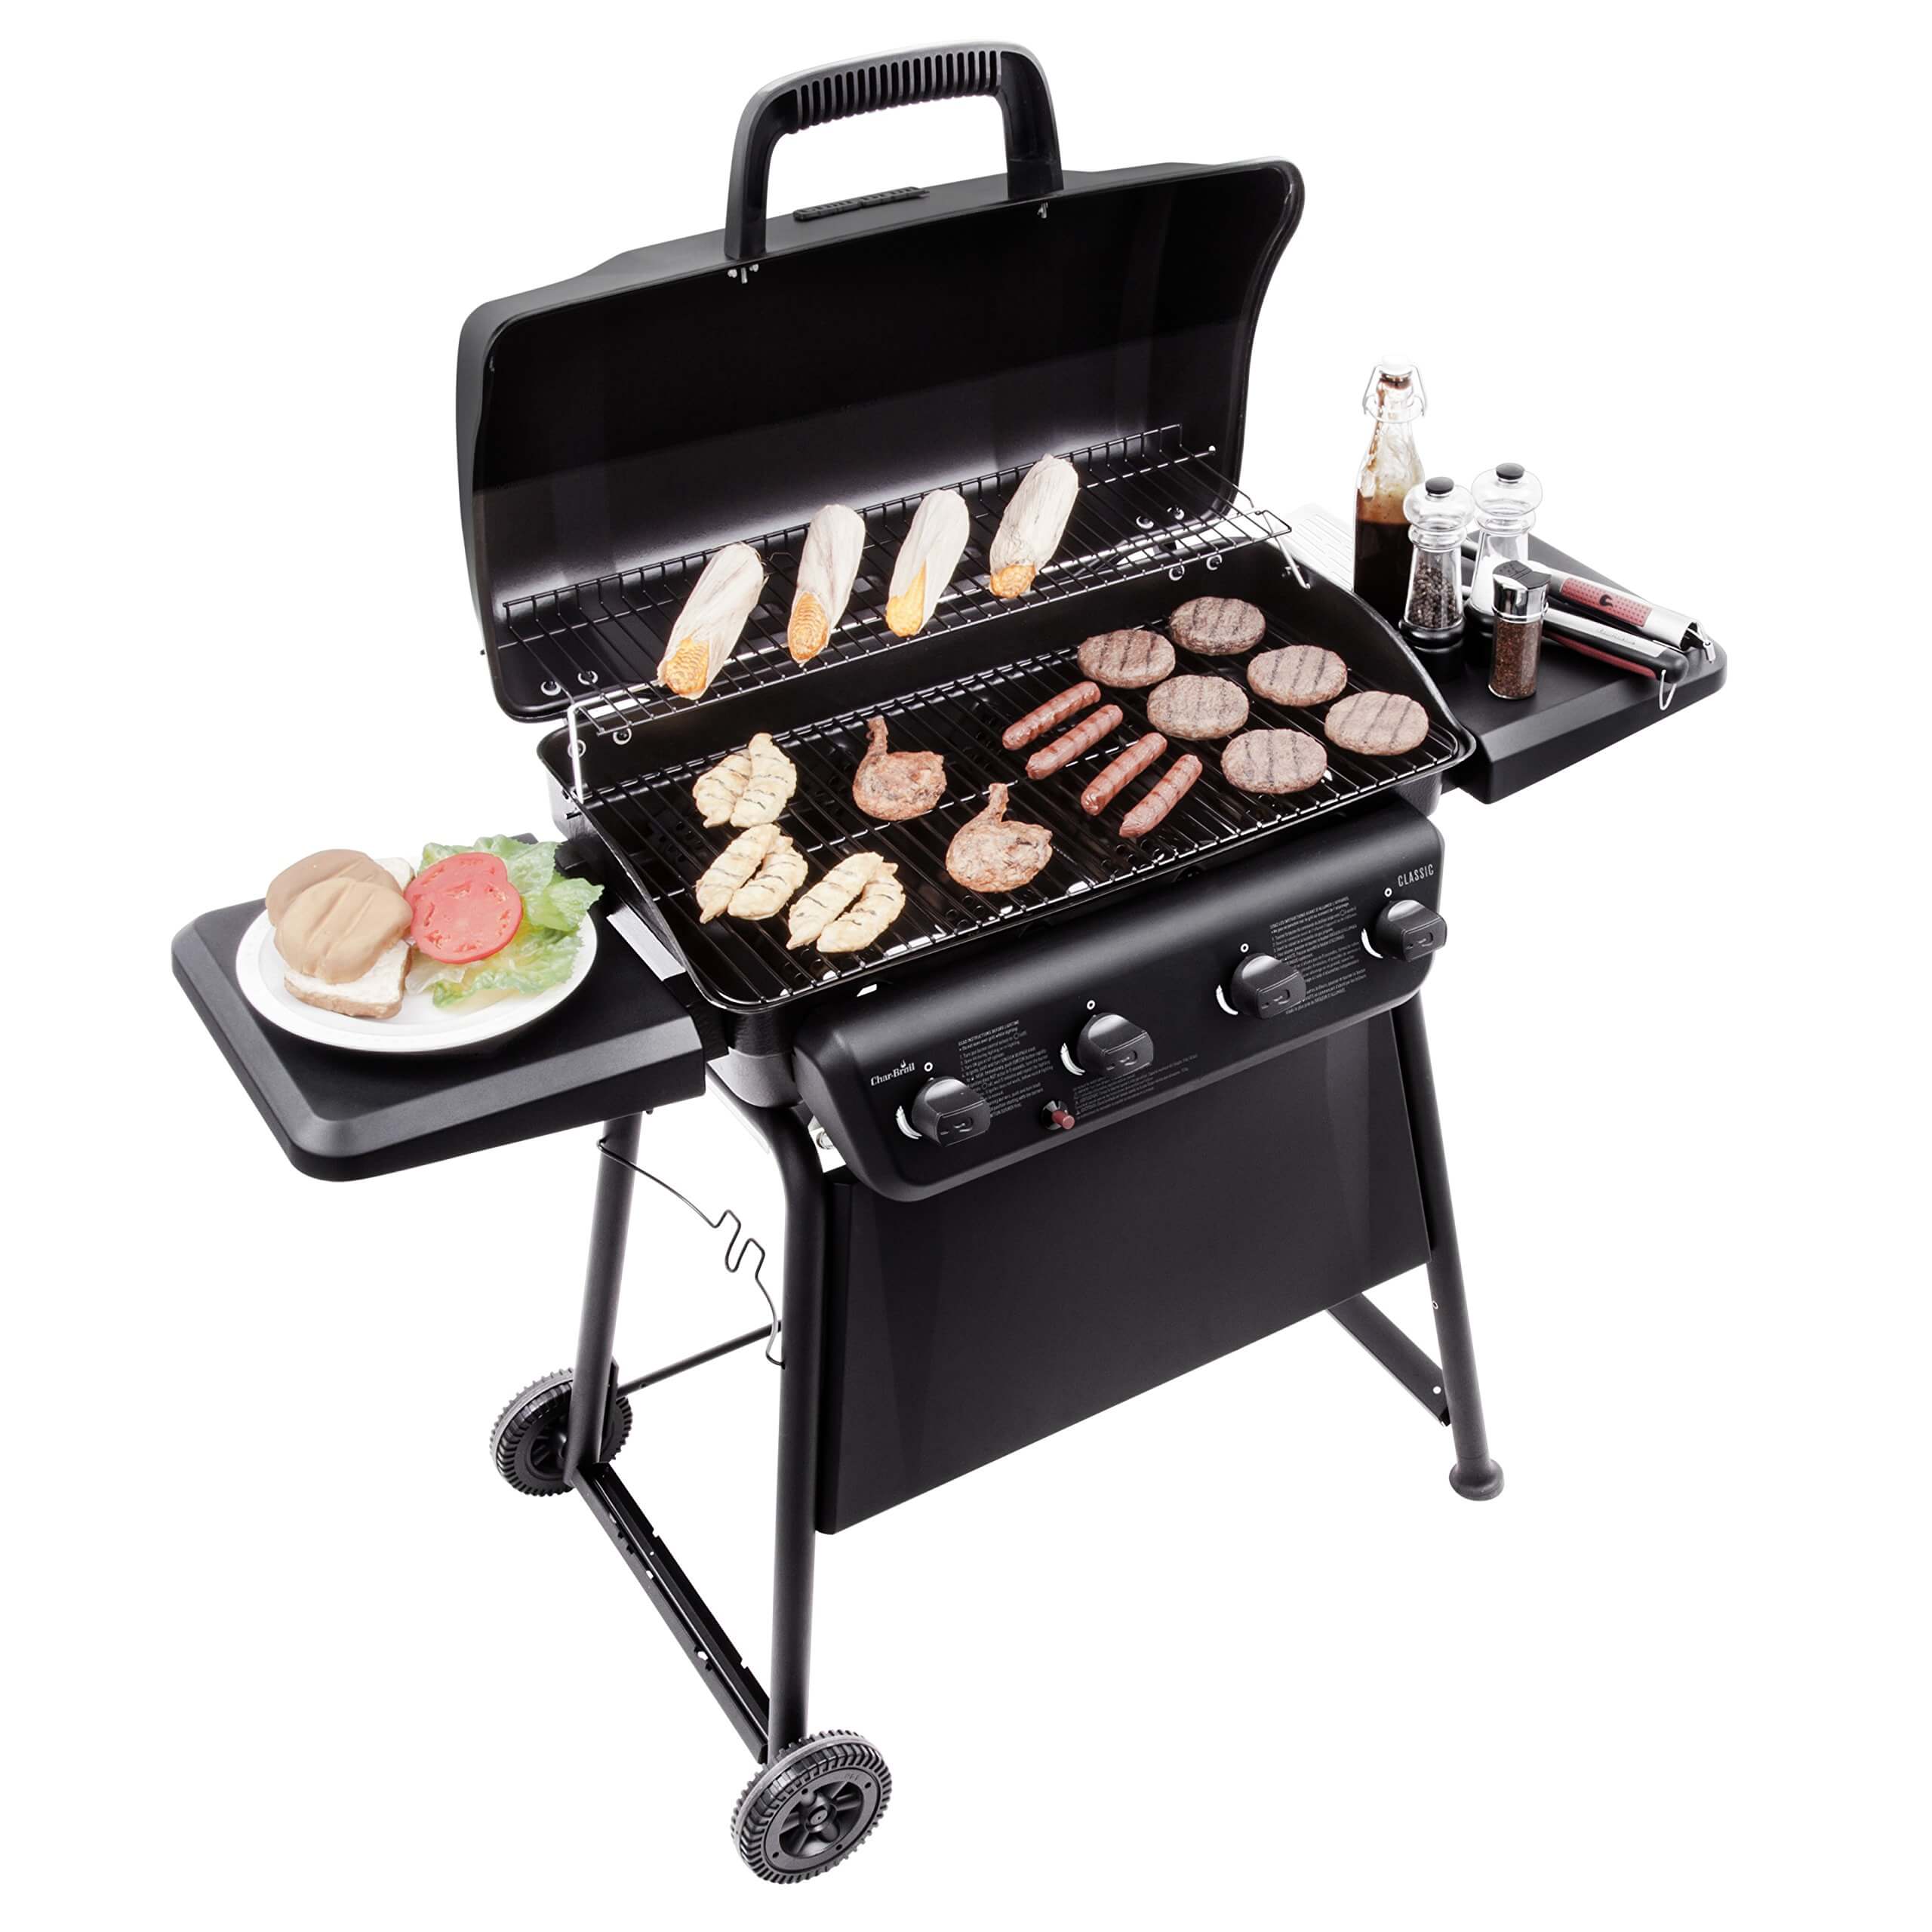 Char-Broil Classic 405 4 – Burner Liquid propane Grill, best propane grills 2020, best bbq grills 2020, grill reviews 2020, best gas grill for the money, char-broil performance 475 gas grill, best gas grills under $300